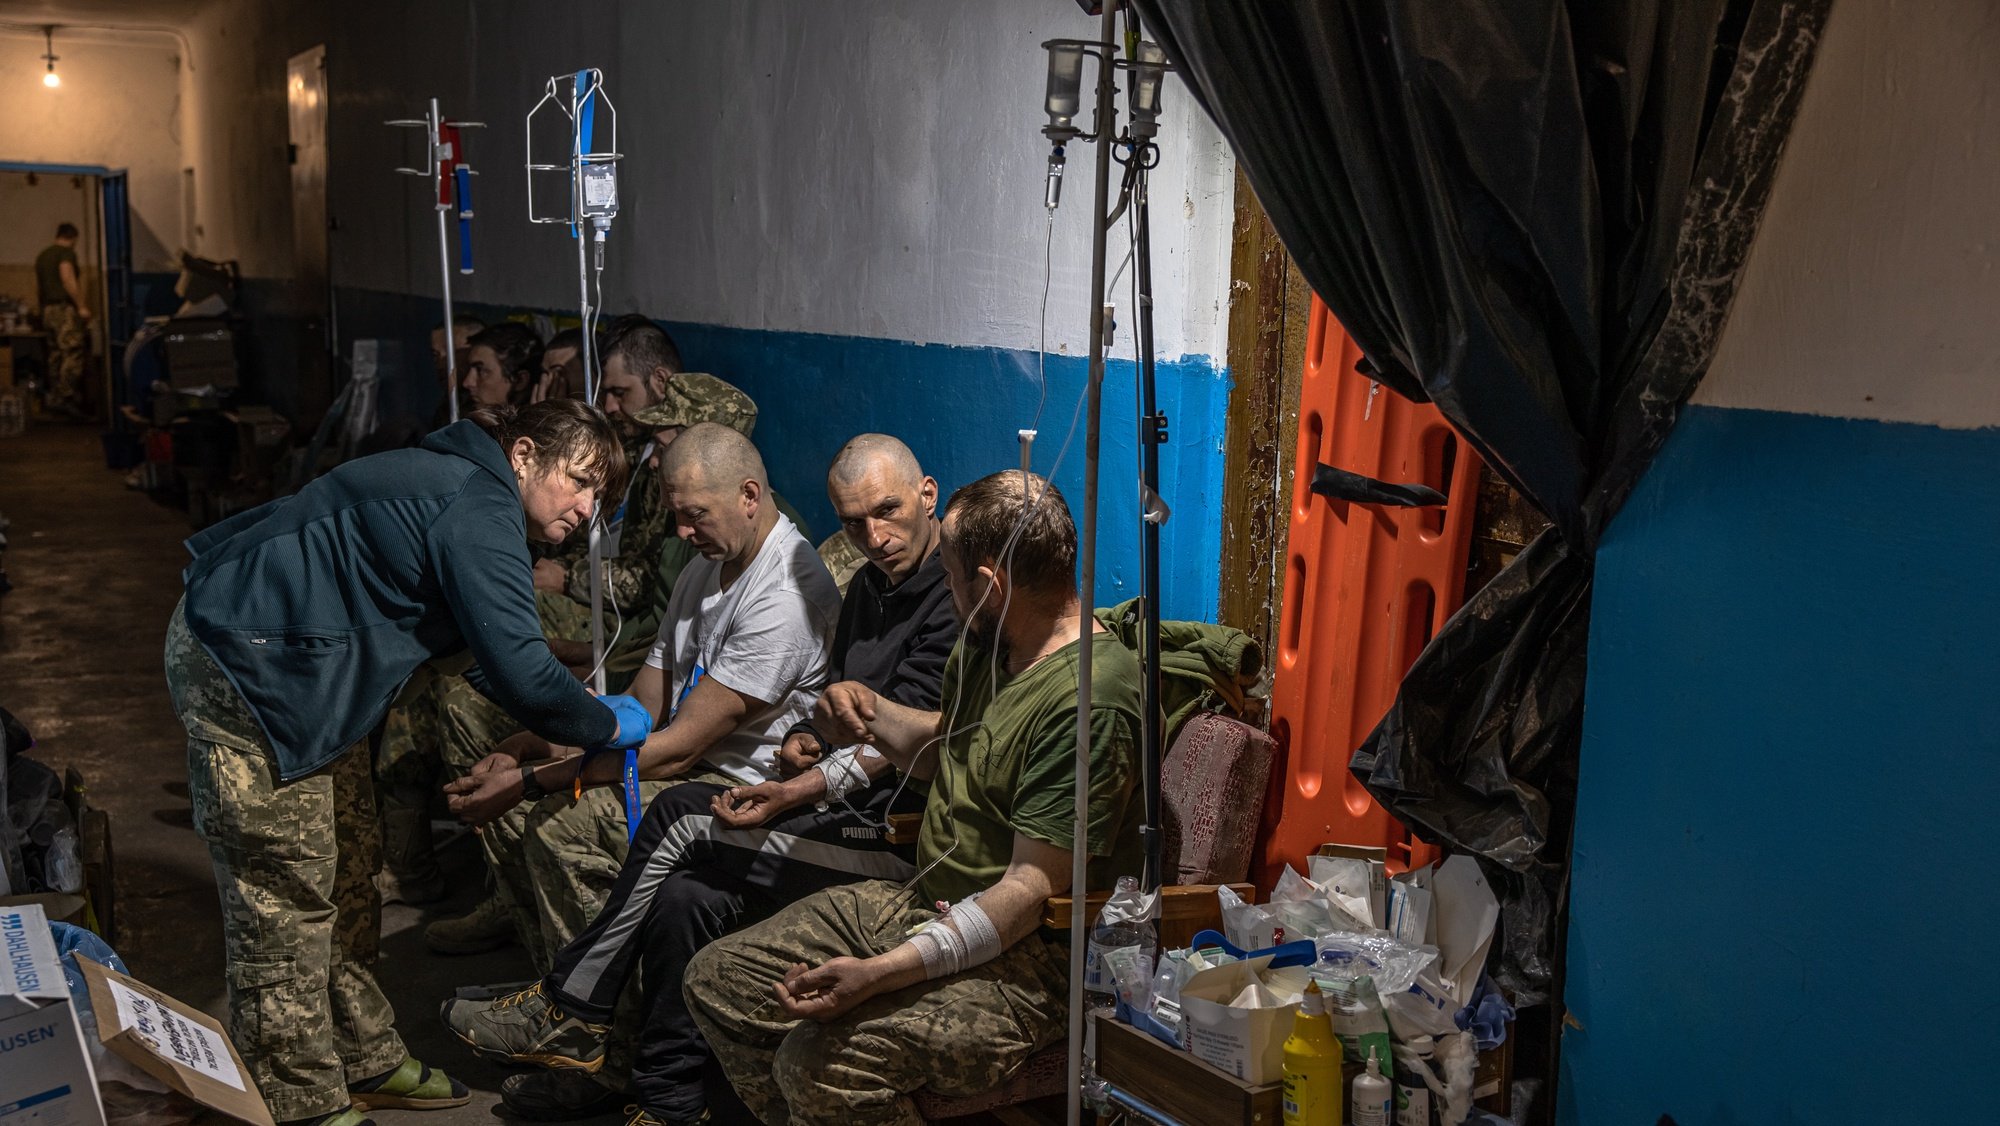 epa09938846 Ukrainian soldiers with minor injuries are treated at a frontline field hospital near Popasna, Luhansk region, eastern Ukraine, 10 May 2022. On 24 February, Russian troops invaded Ukrainian territory starting a conflict that has provoked destruction and a humanitarian crisis. According to the UNHCR on 09 May, about 5.9 million Ukrainians have left the country to seek refuge abroad.  EPA/ROMAN PILIPEY